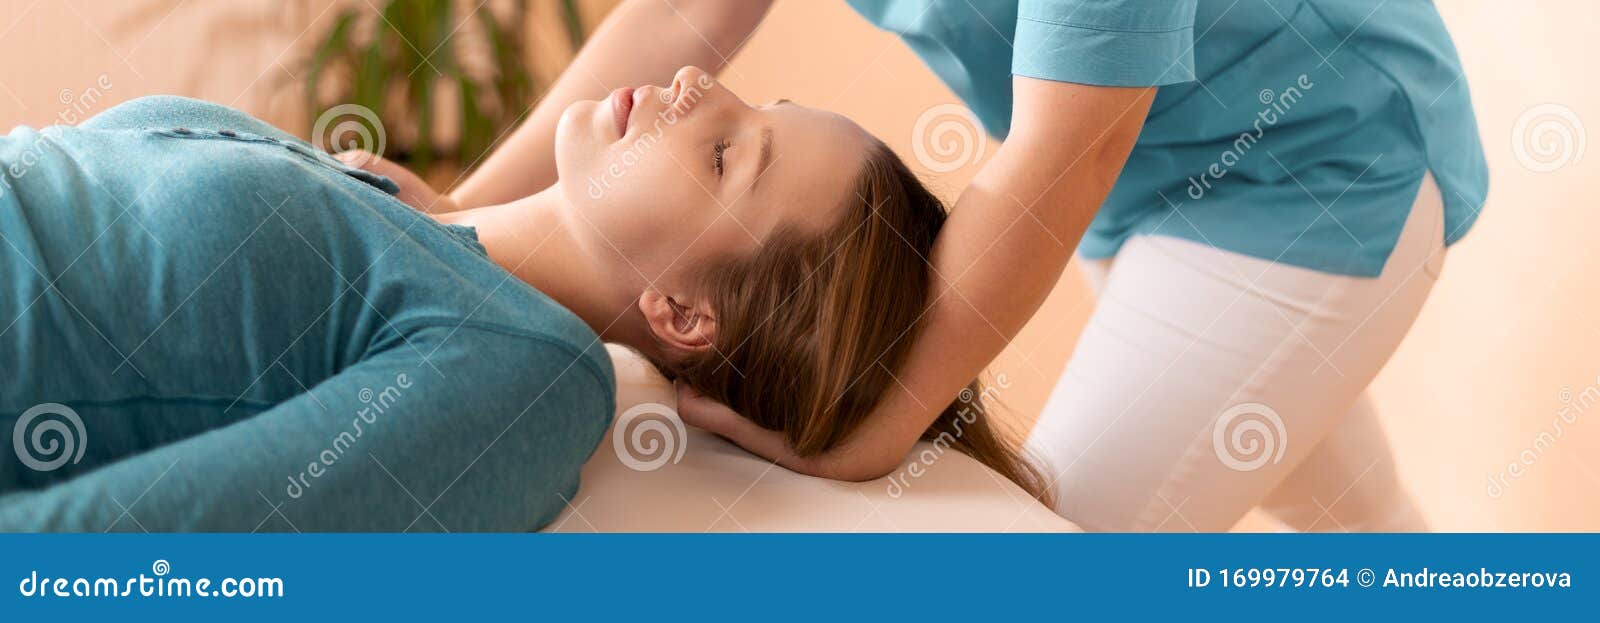 female physiotherapist or a chiropractor adjusting patients neck. physiotherapy, rehabilitation concept. cropped shot banner.